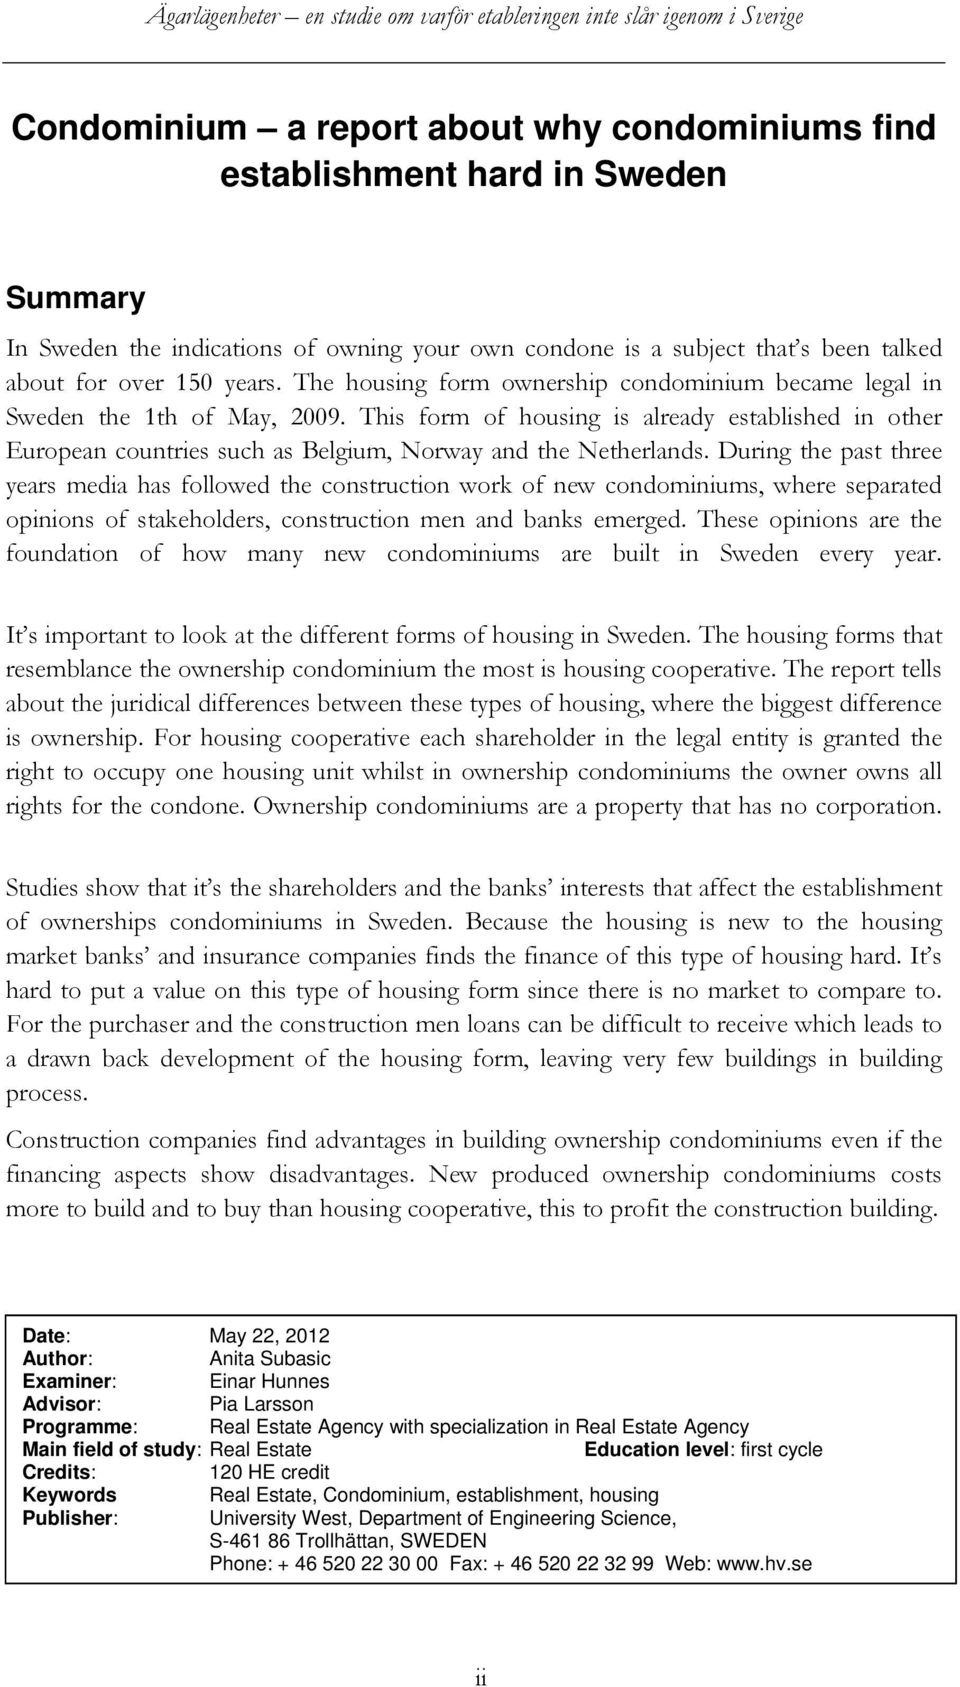 During the past three years media has followed the construction work of new condominiums, where separated opinions of stakeholders, construction men and banks emerged.